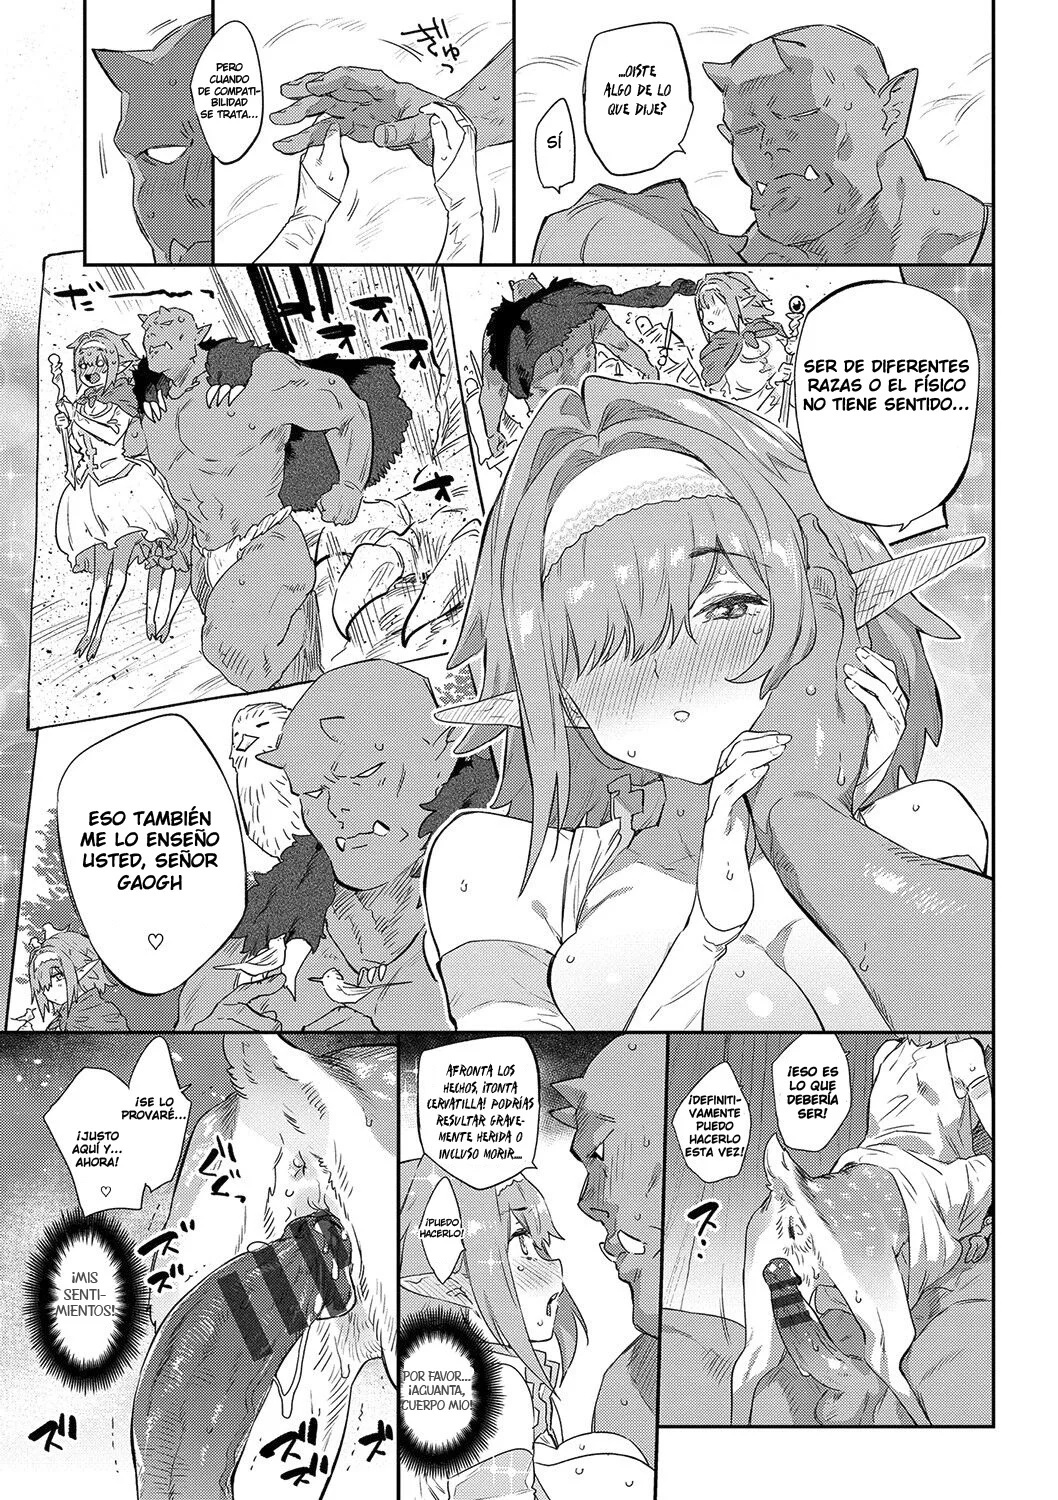 Ihou no Otome-Monsters Girls in Another World 1 - 15